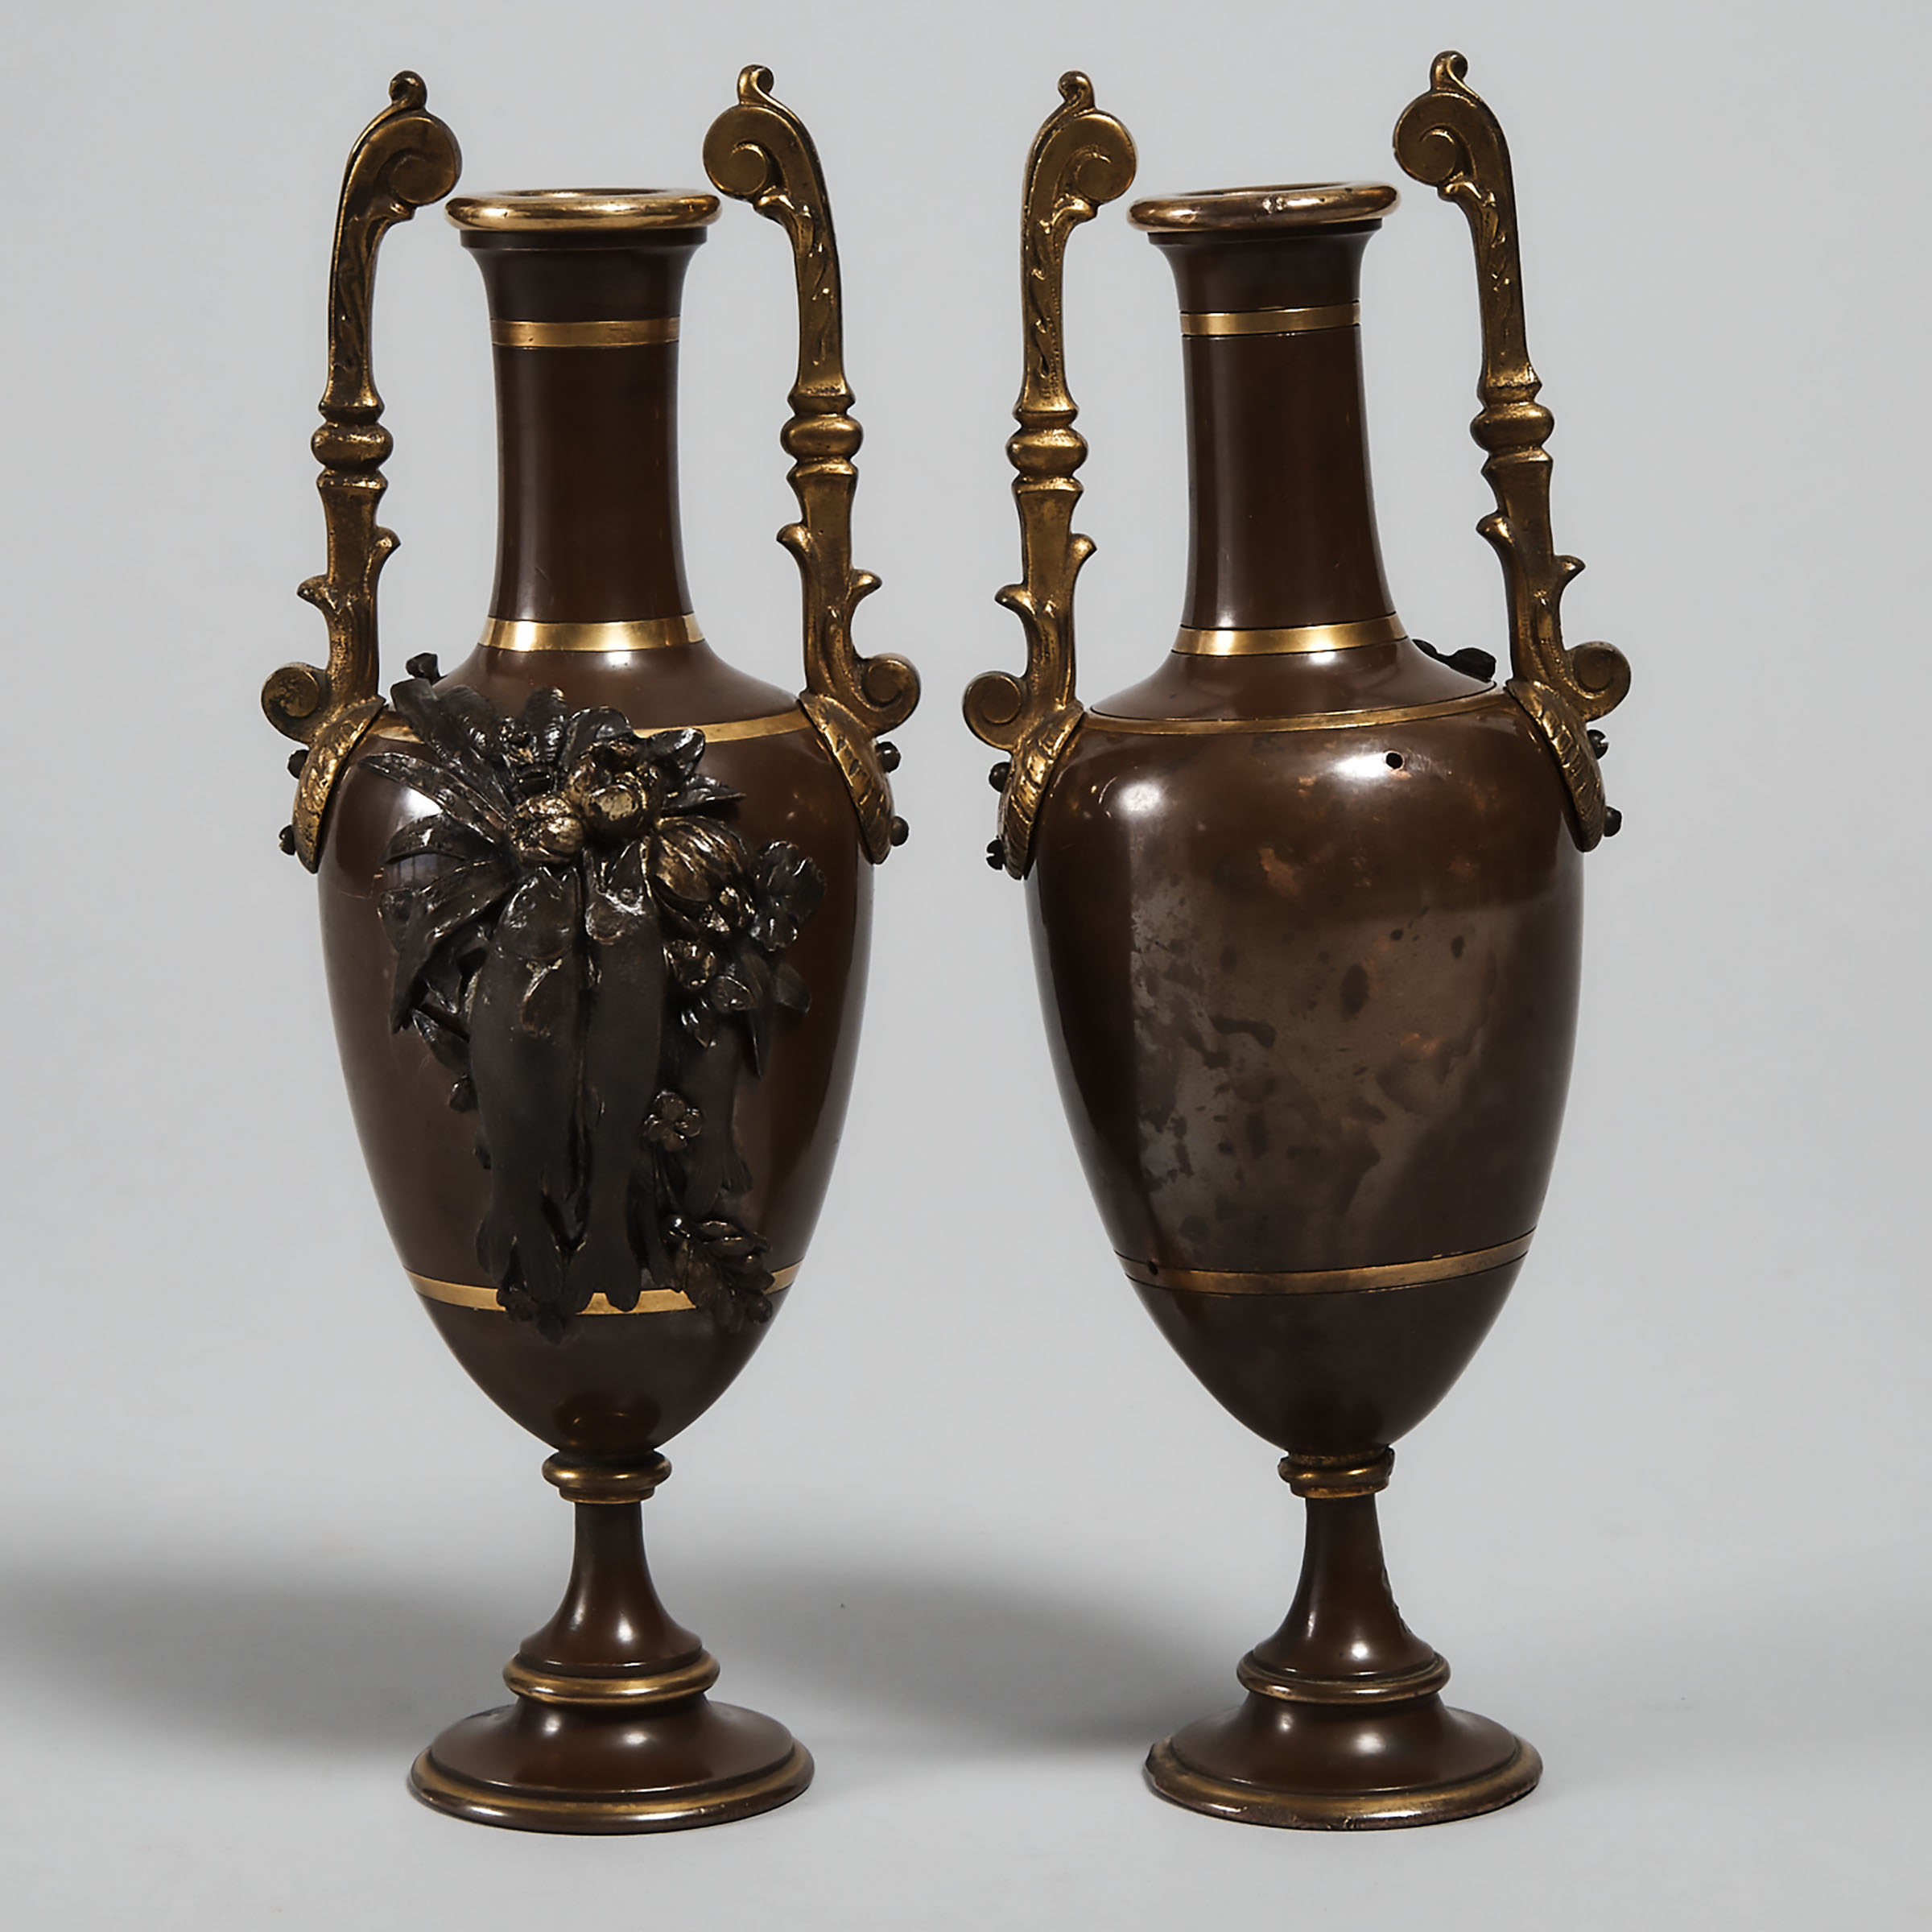 Pair of Small French Patinated Copper and Gilt Metal Mantle Vases, 19th century